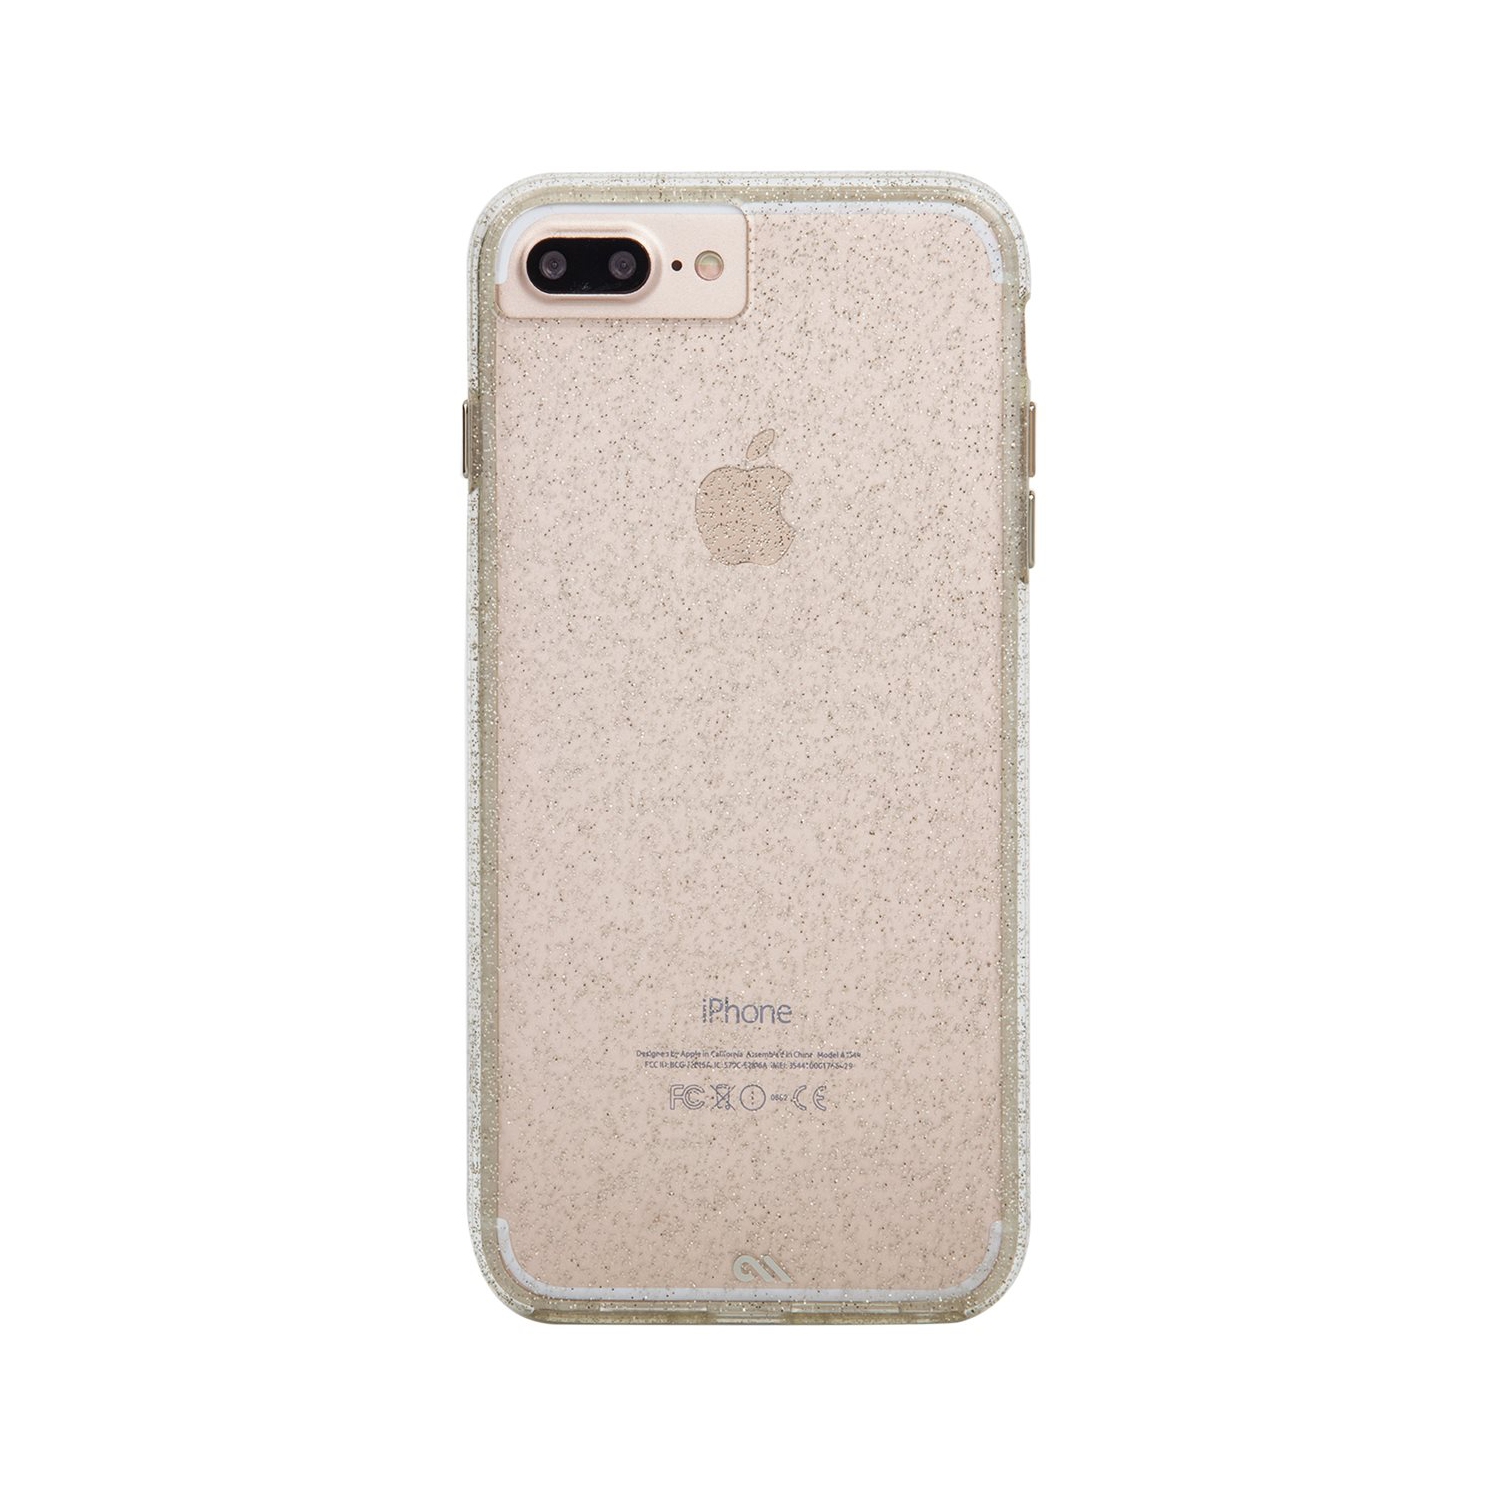 Case-Mate Sheer Glam Case for iPhone 6s Plus/7 Plus/8 Plus - Champagne